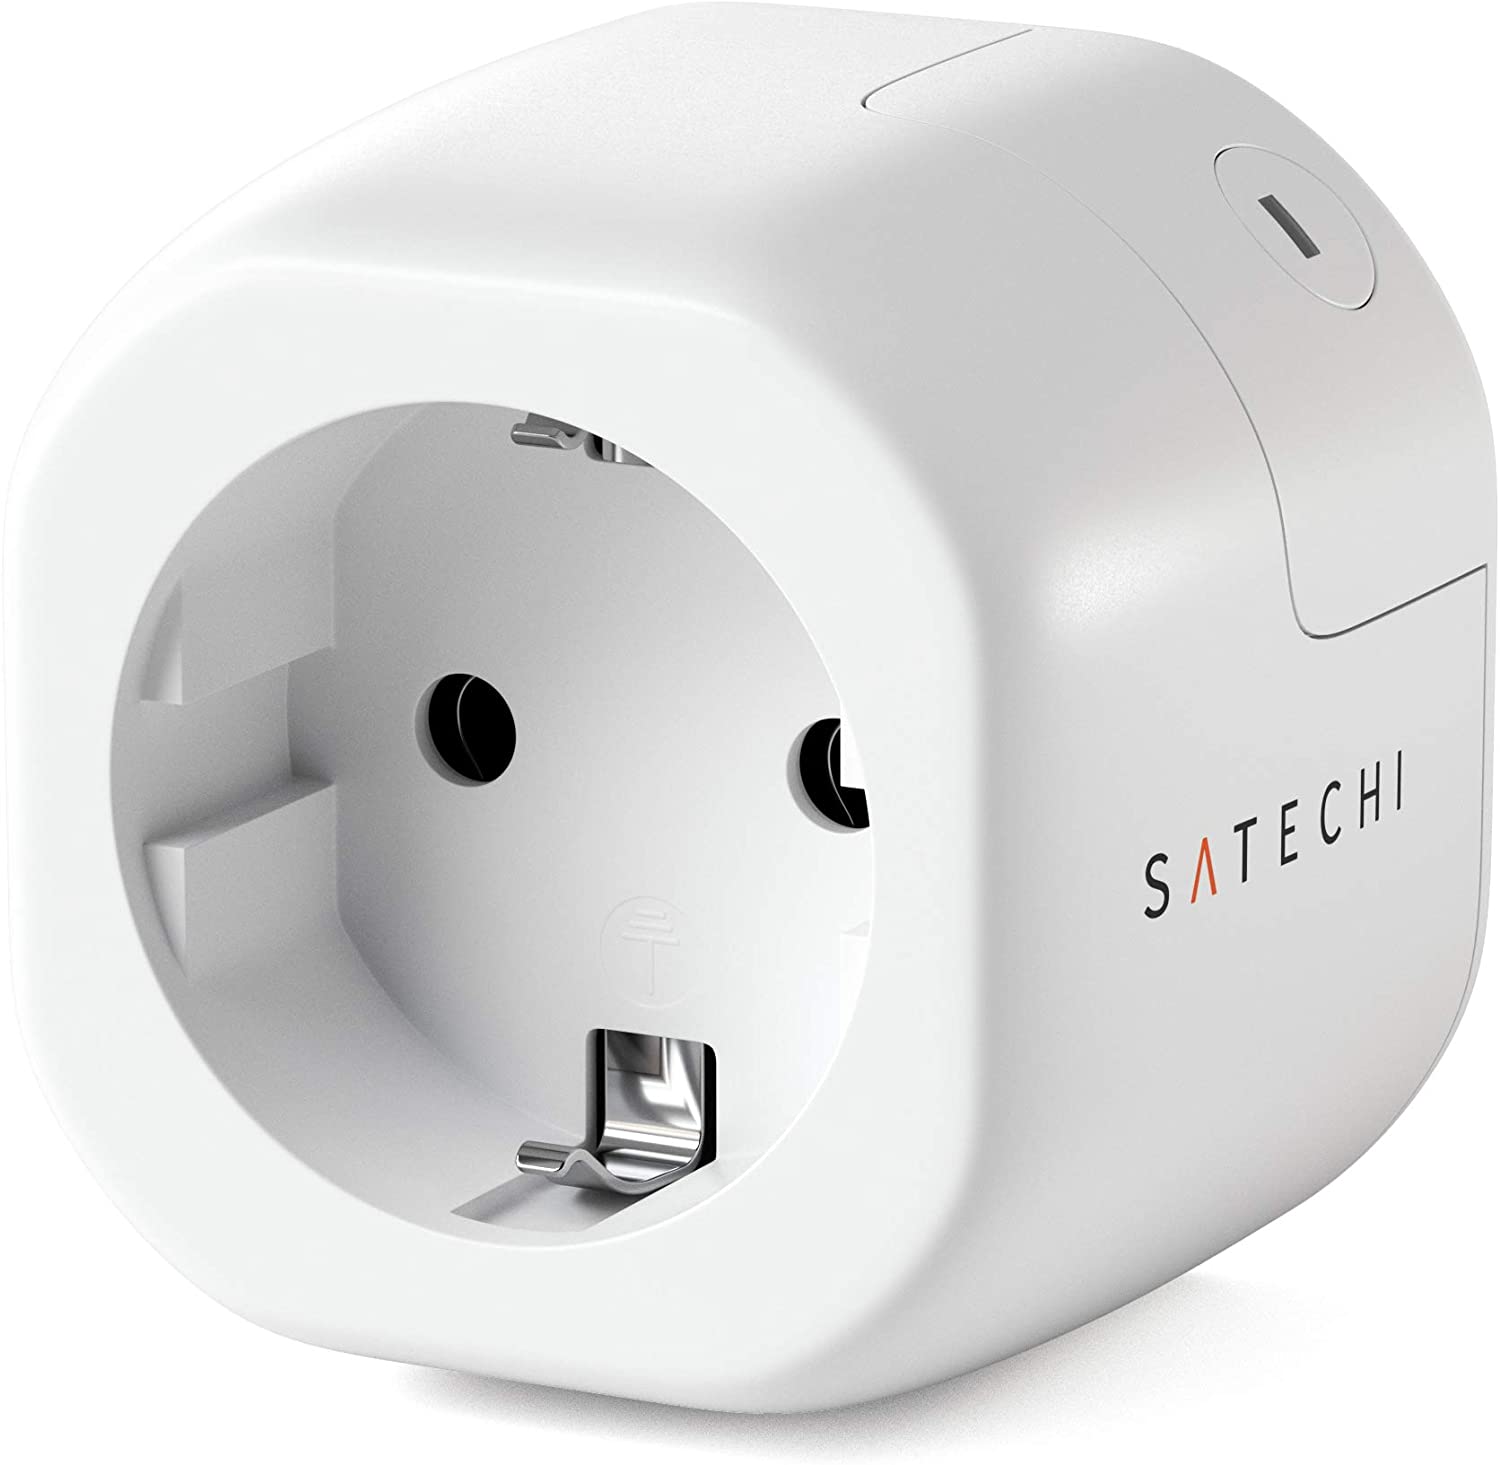 The Smart Socket for HomeKit EU Satechi is now available